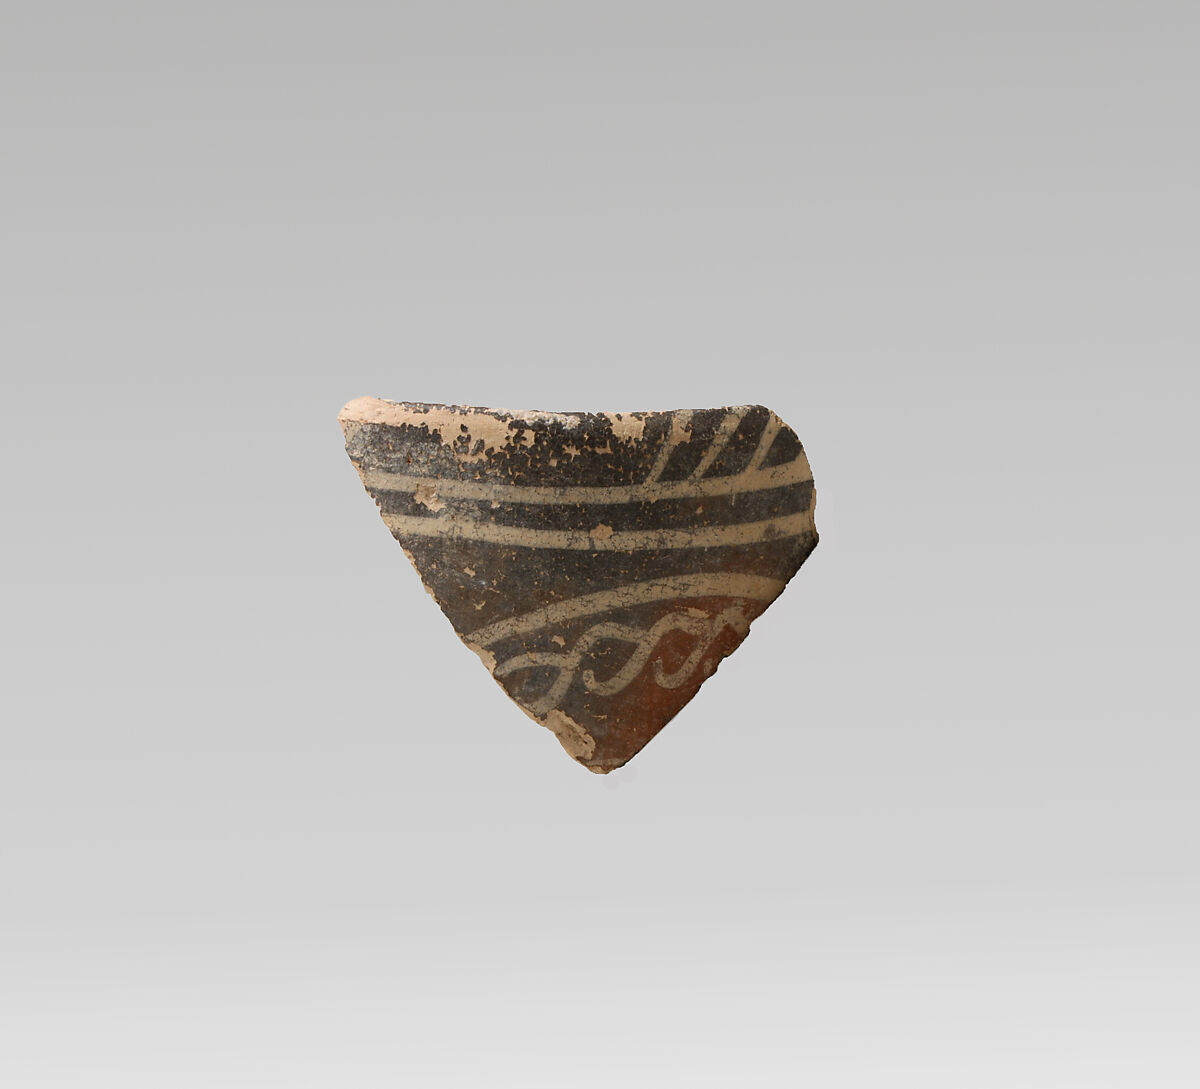 Terracotta rim fragment with quirks and bands, Terracotta, Minoan 